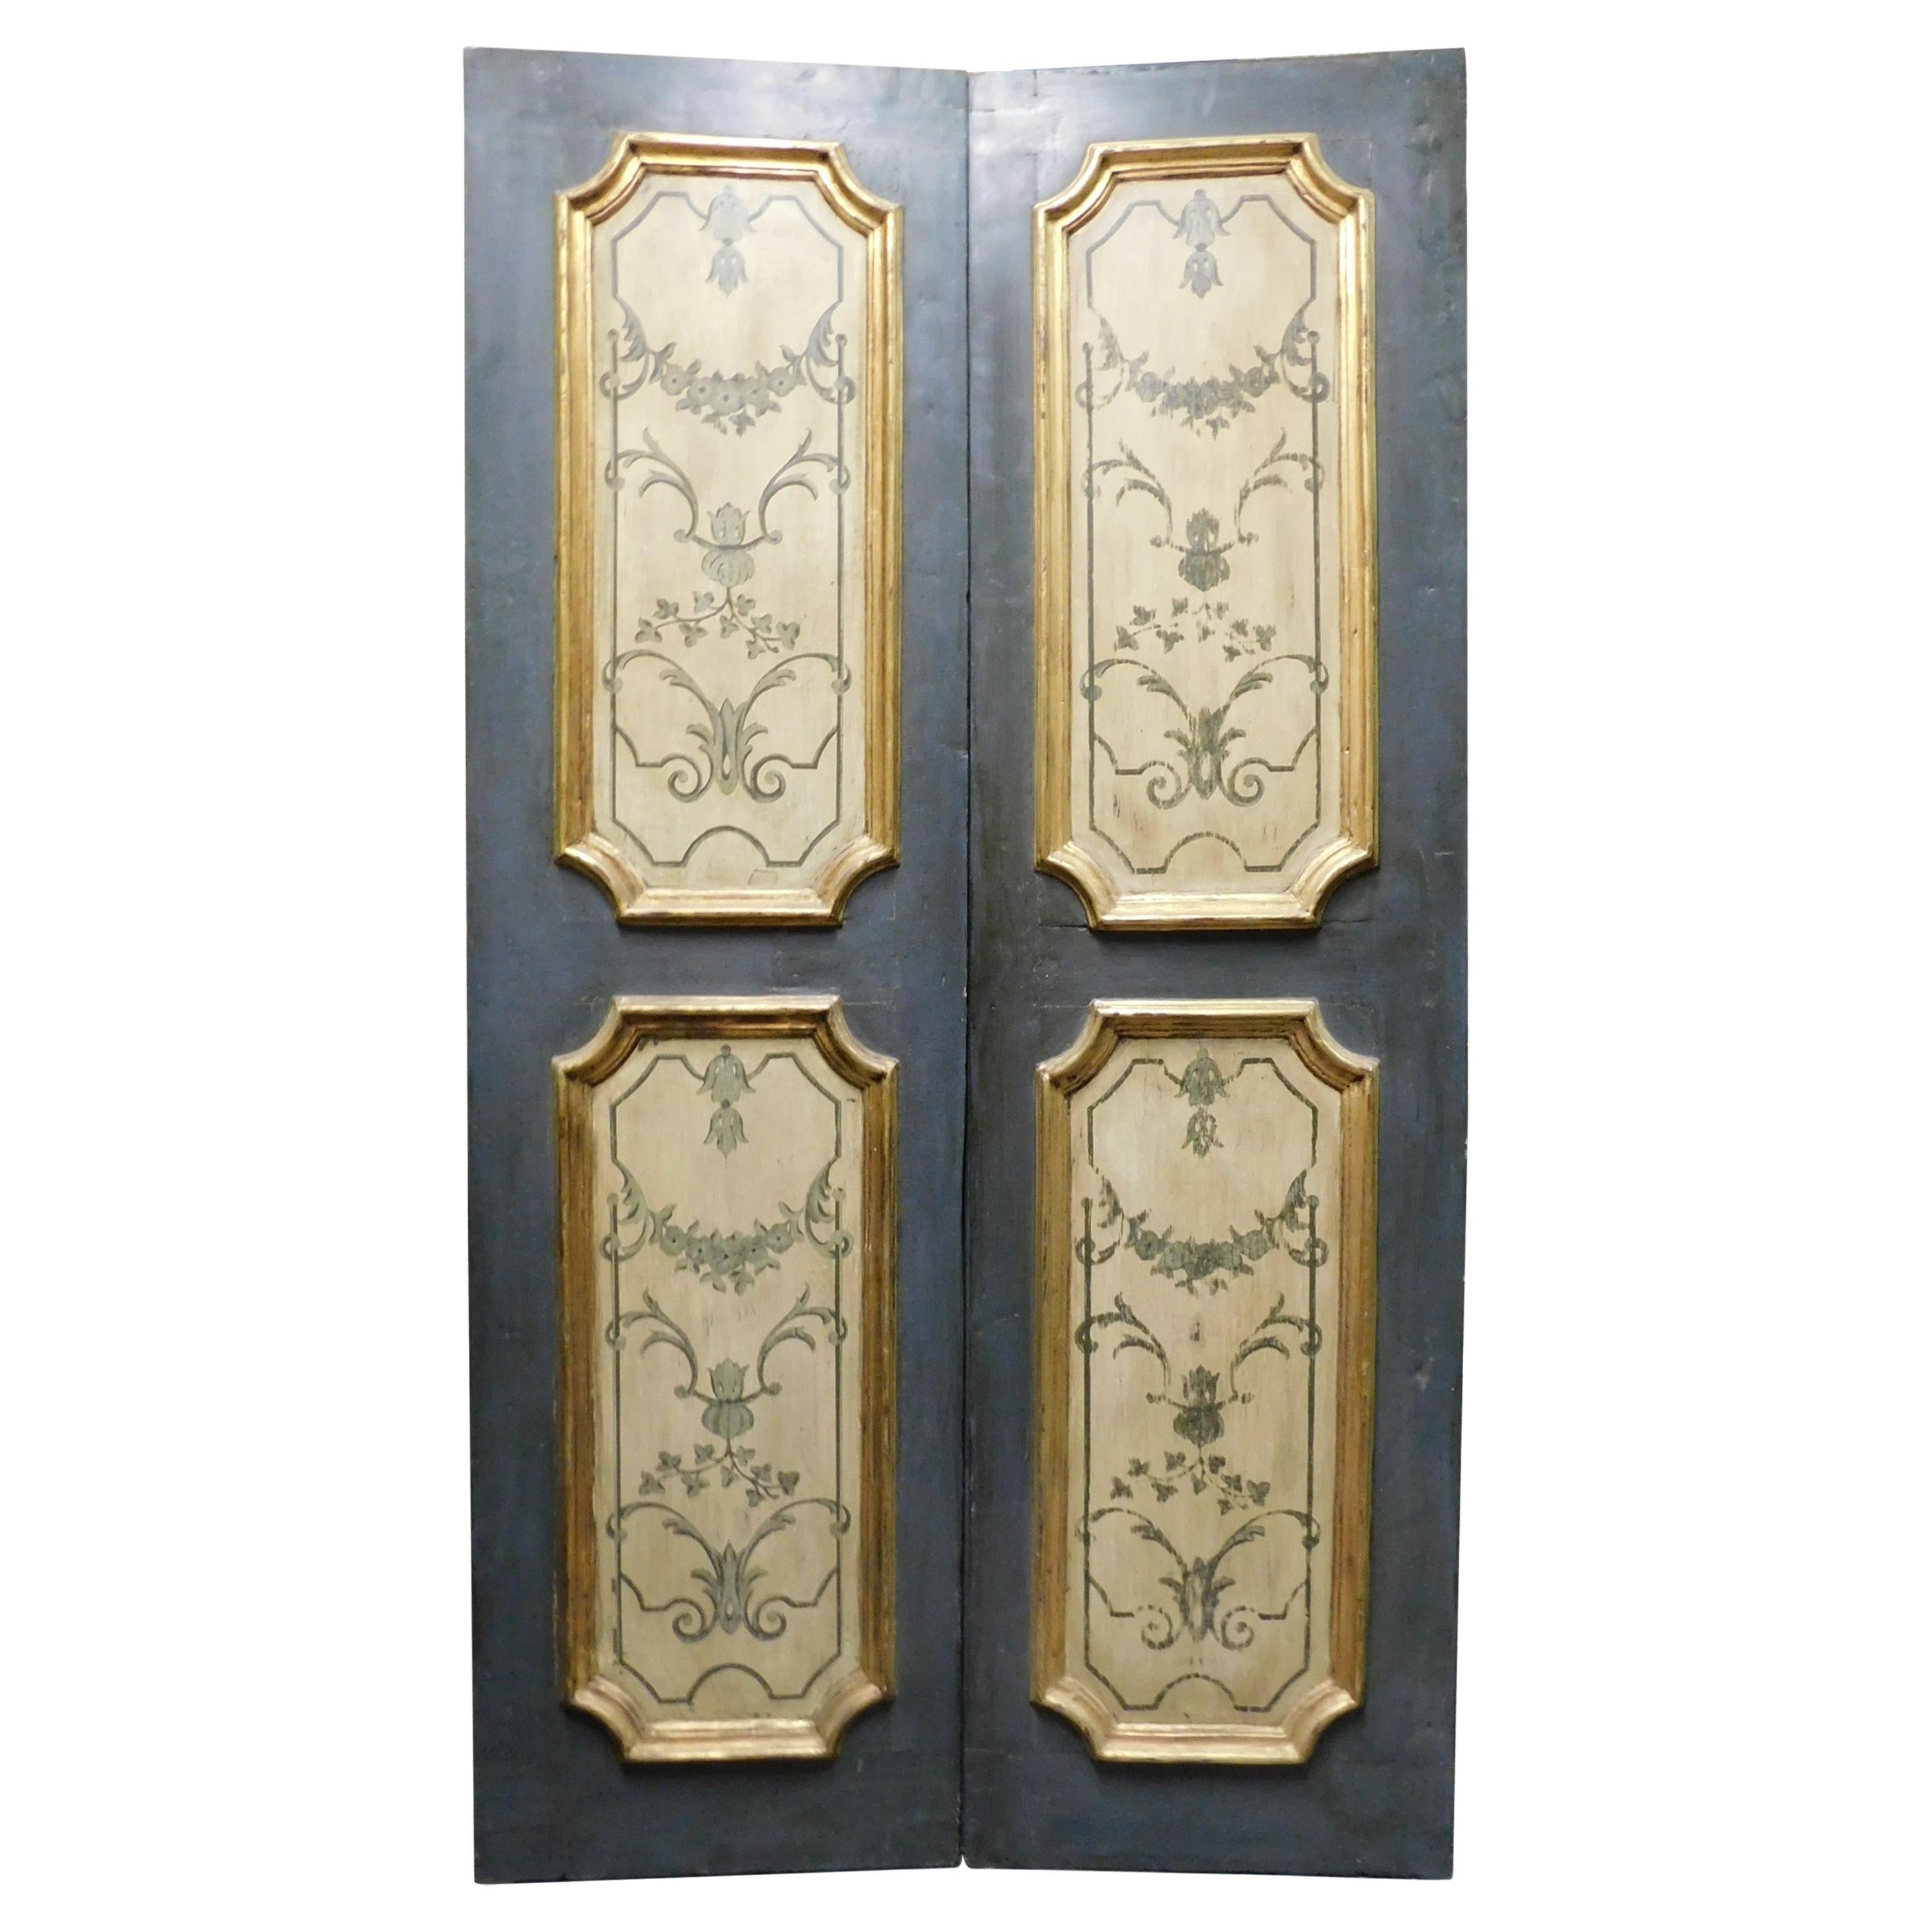 Antique Double Door, Painted and Gilded Panels, 18th Century, Italy 'Milan'